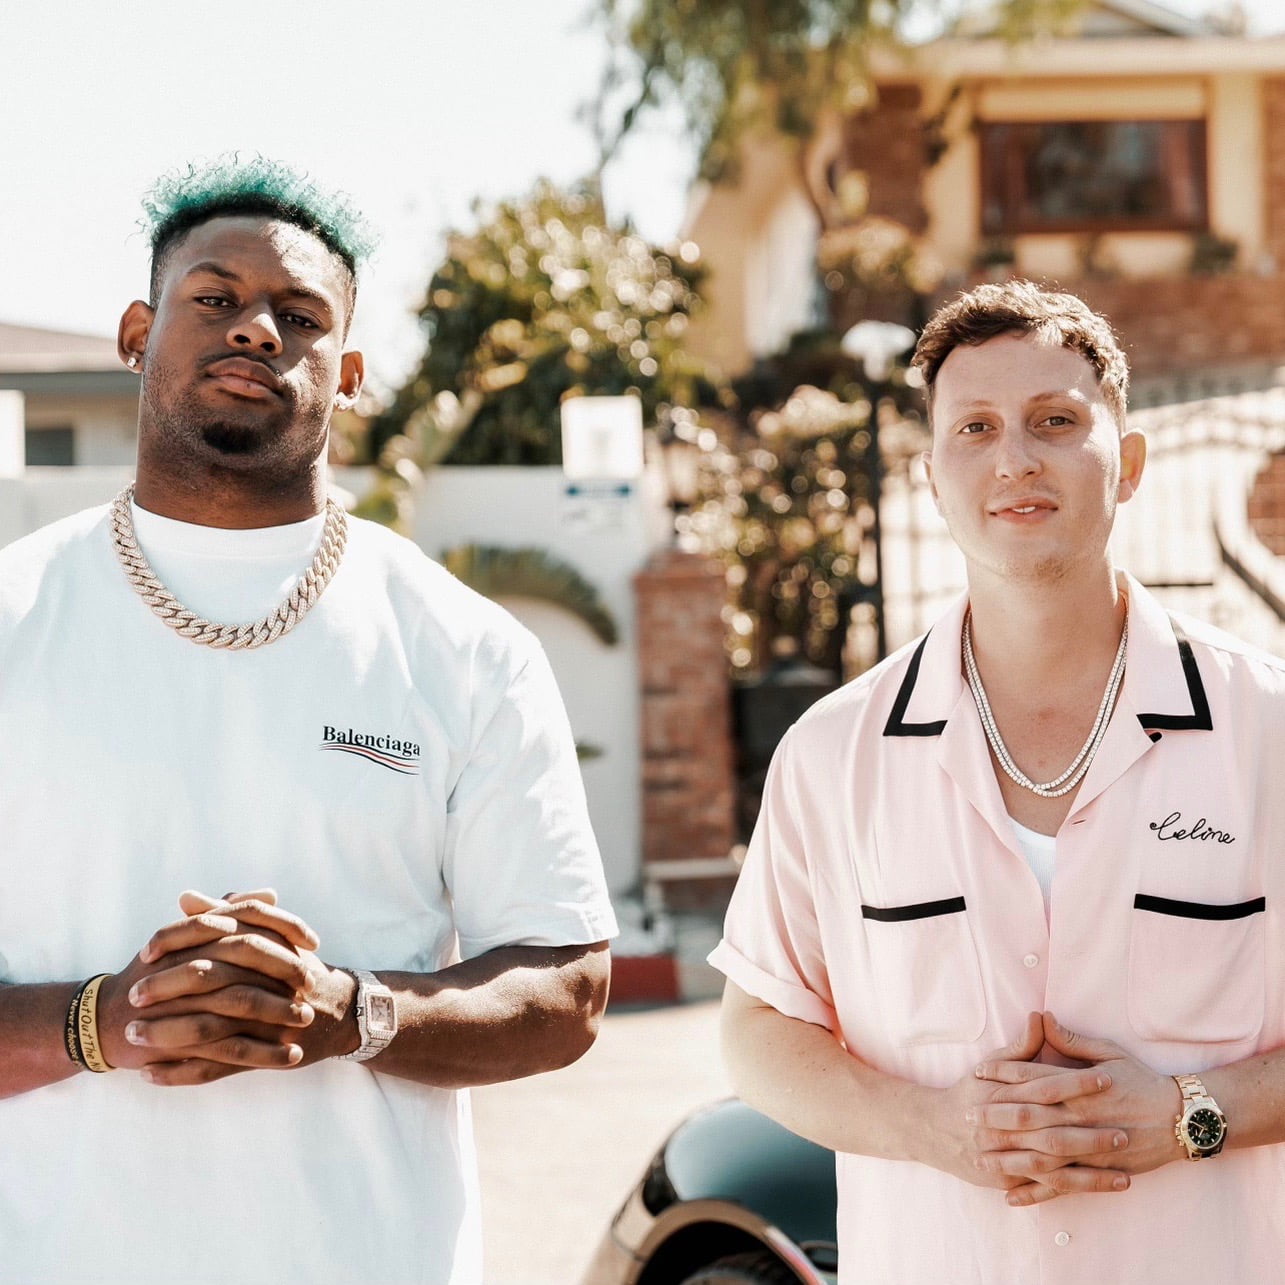 Greg Grillz x JuJu Smith Schuster collab for Grillz.com image via Kyra Breslin at One Fourteen Entertainment for use by 360 Magazine